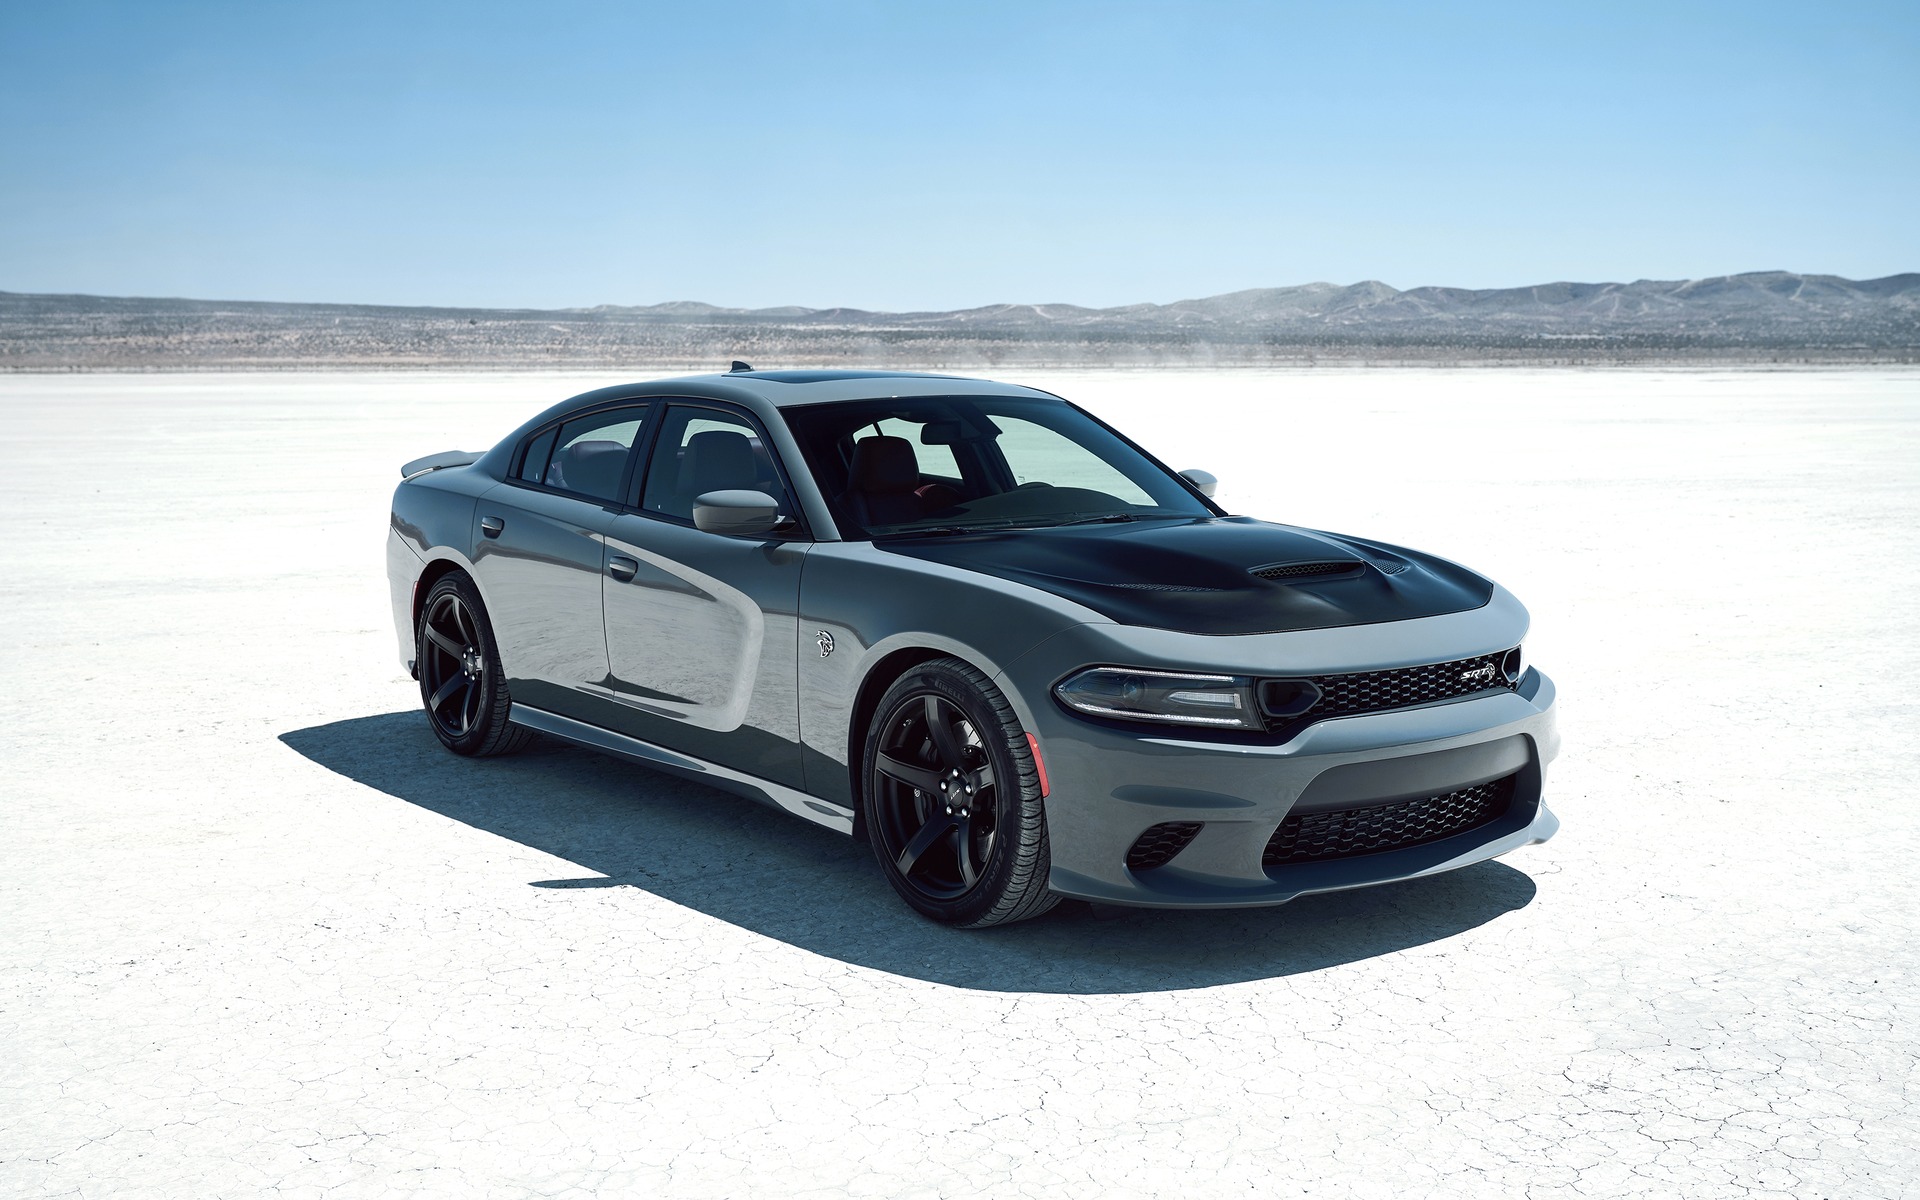 2019 Dodge Charger SRT Hellcat Specifications - The Car Guide